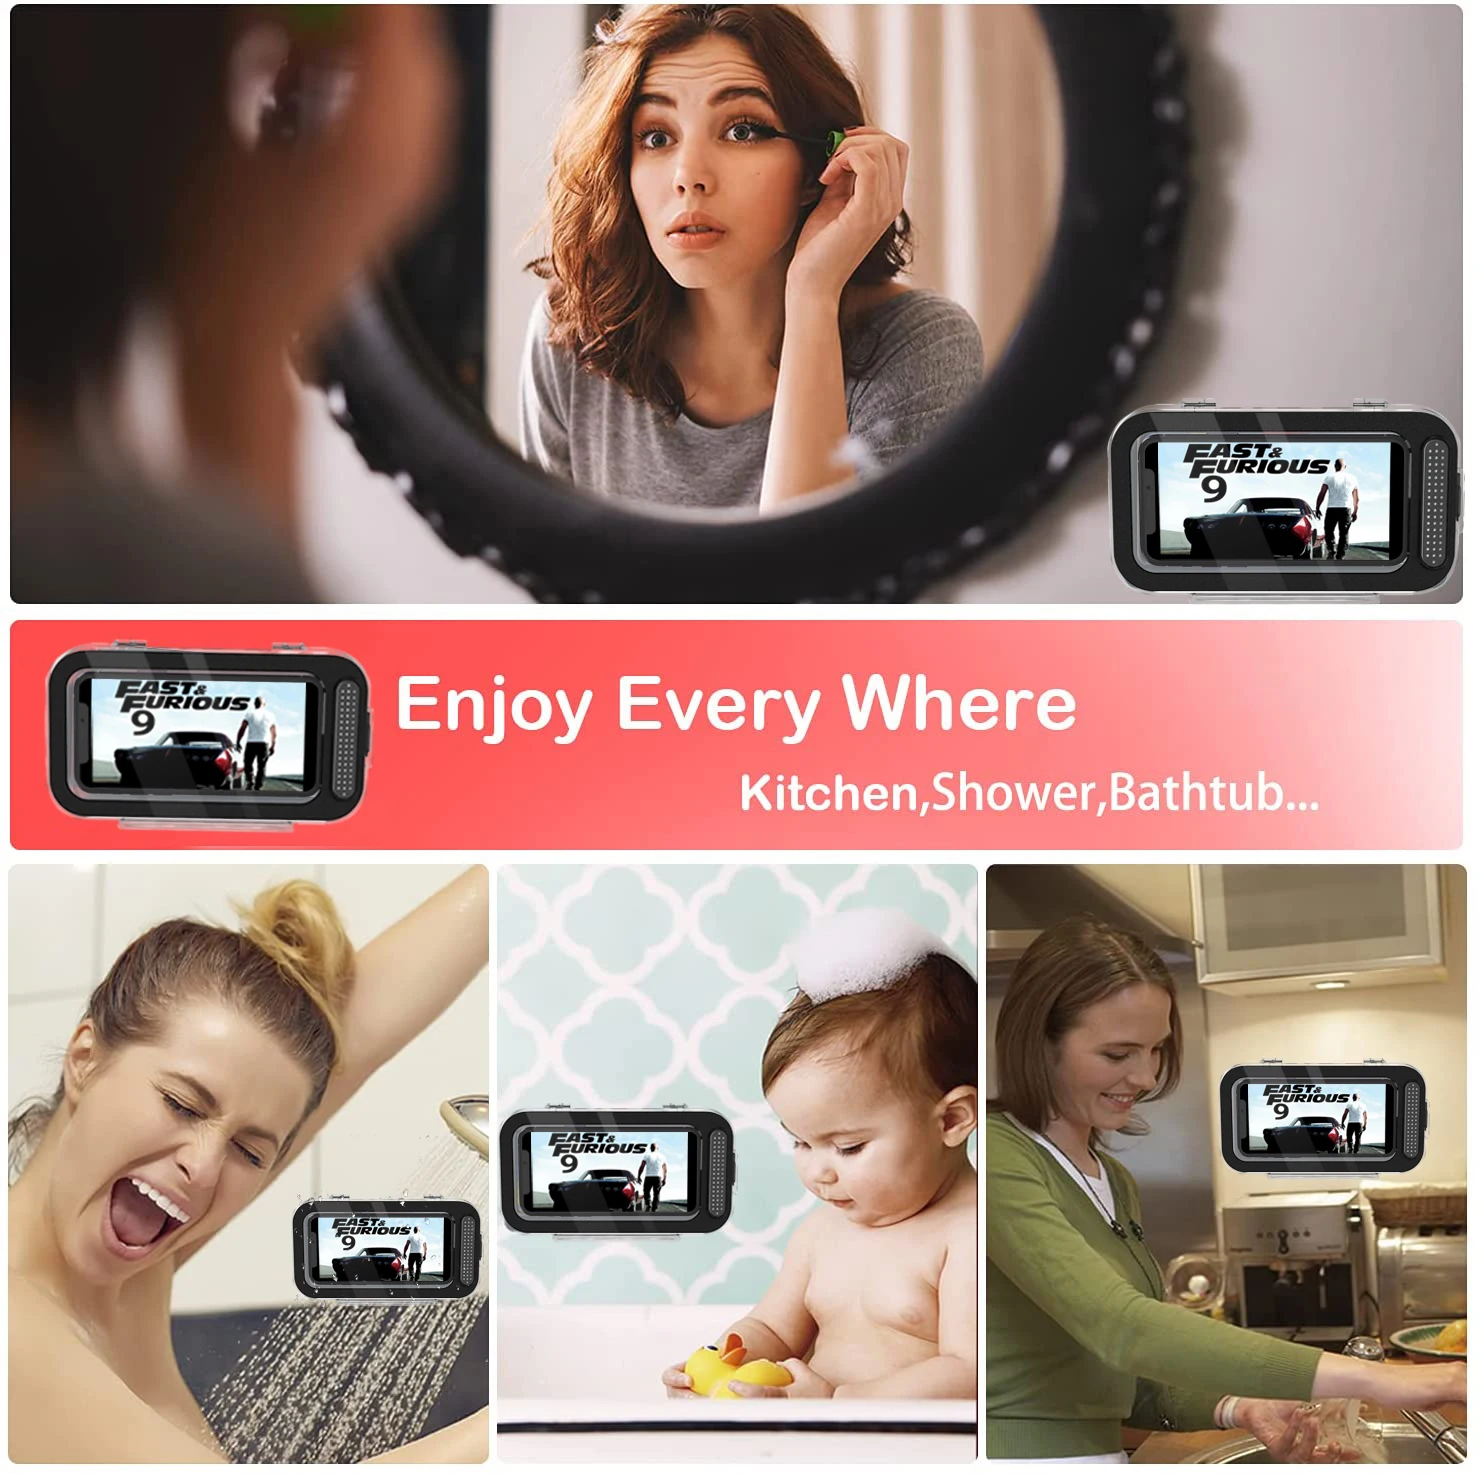 phone holder bathroom waterproof home wall mount case stand box self adhesive touch screen phone shell shower sealing storage free global shipping